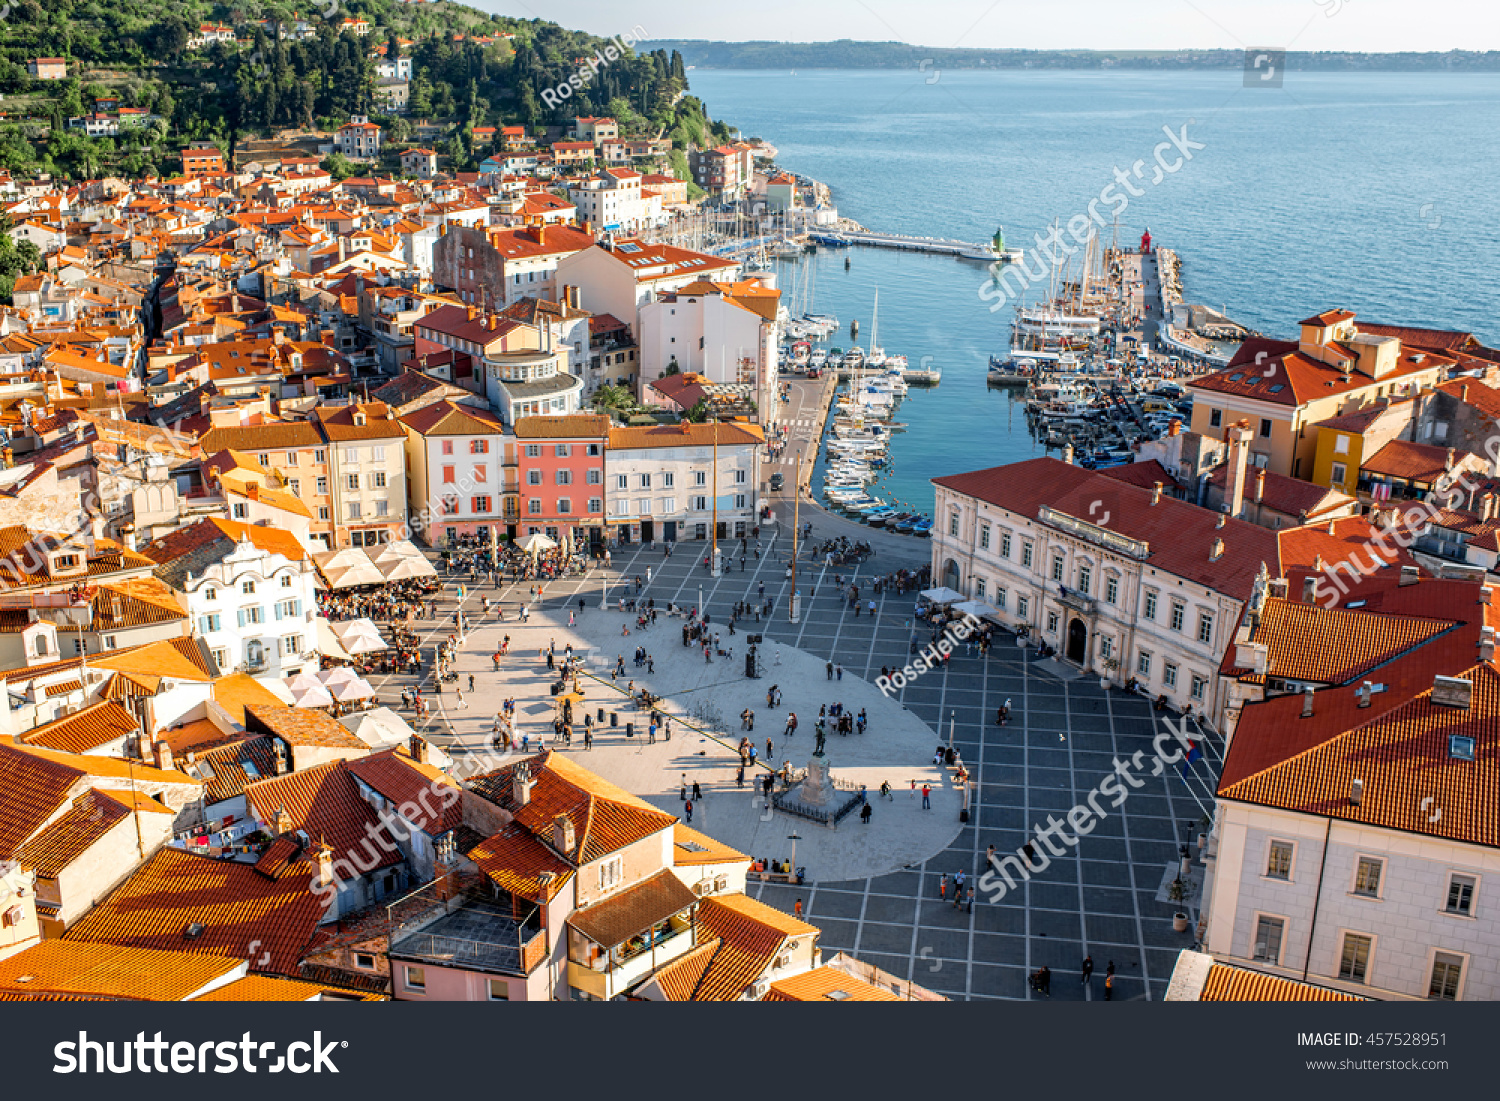 Beautiful aerial view on Piran town with Tartini main square, ancient buildings with red roofs and Adriatic sea in southwestern Slovenia #457528951